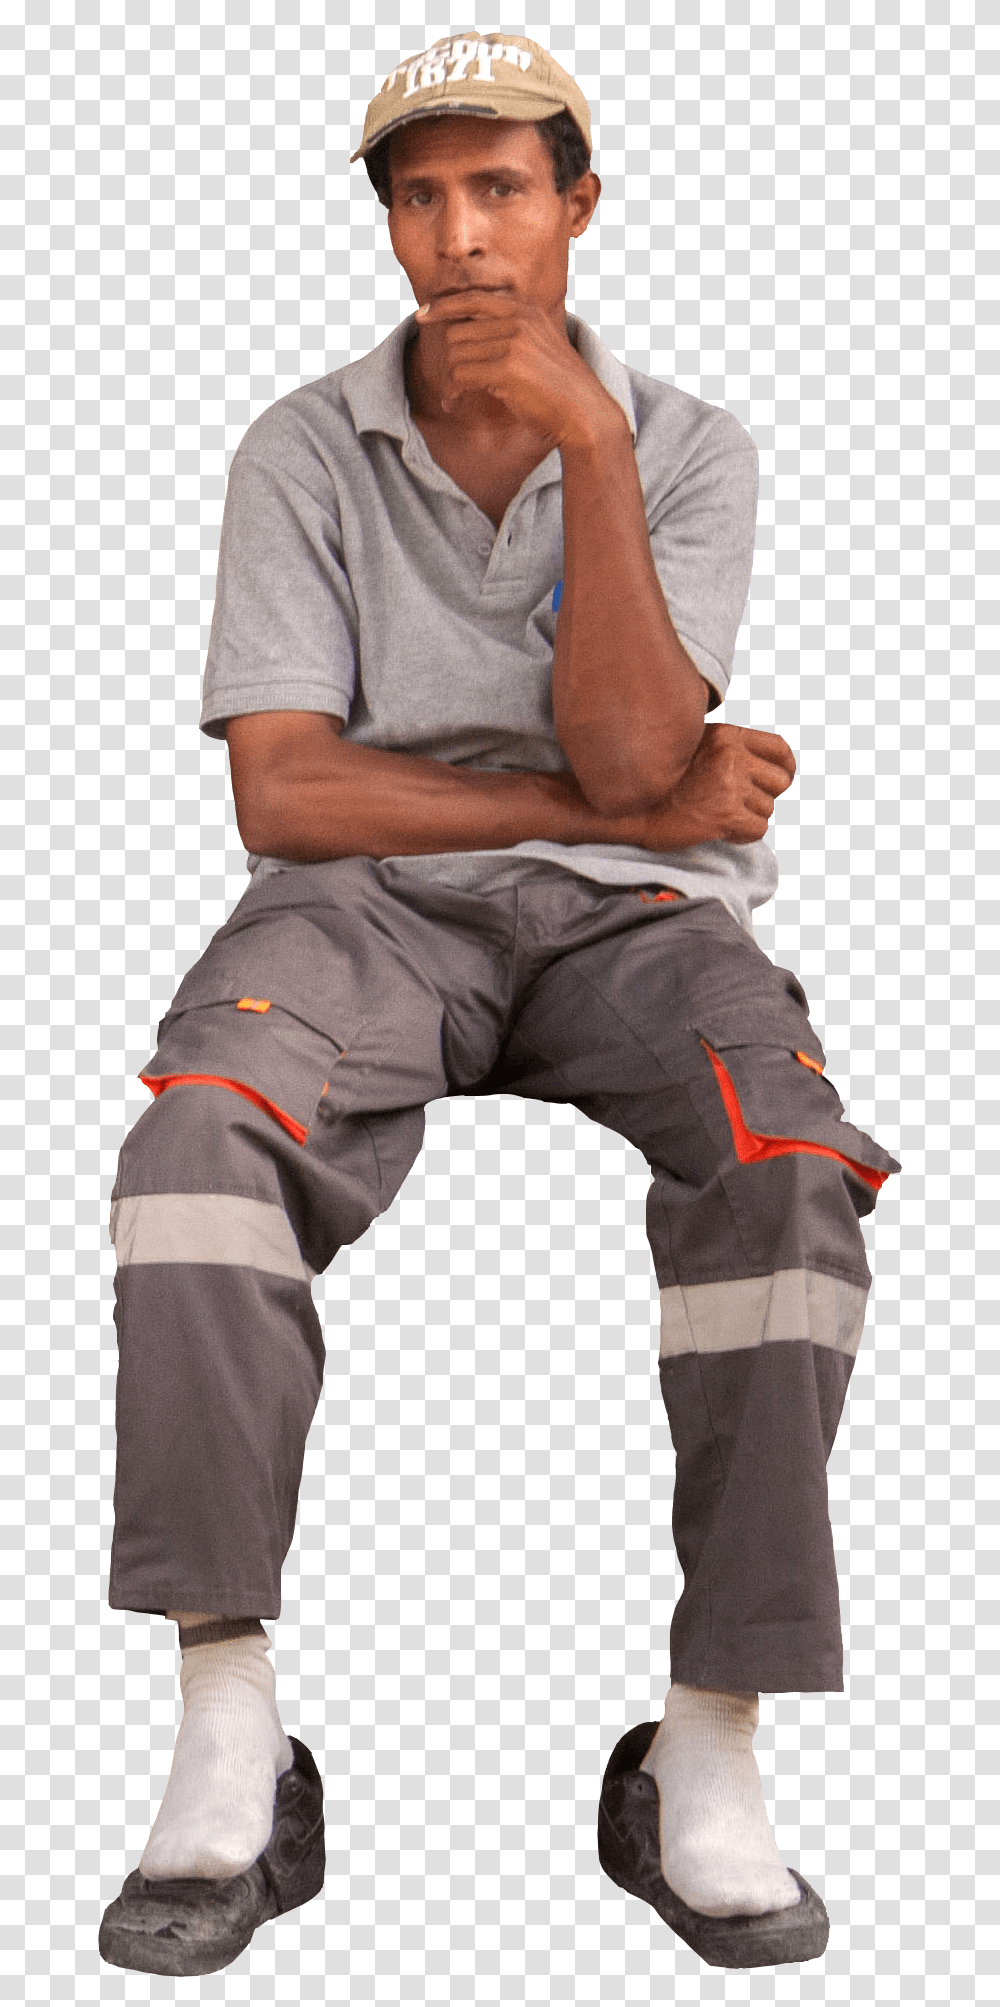 Sitting - People Cutouts People Sit Front View, Person, Clothing, Pants, Shorts Transparent Png